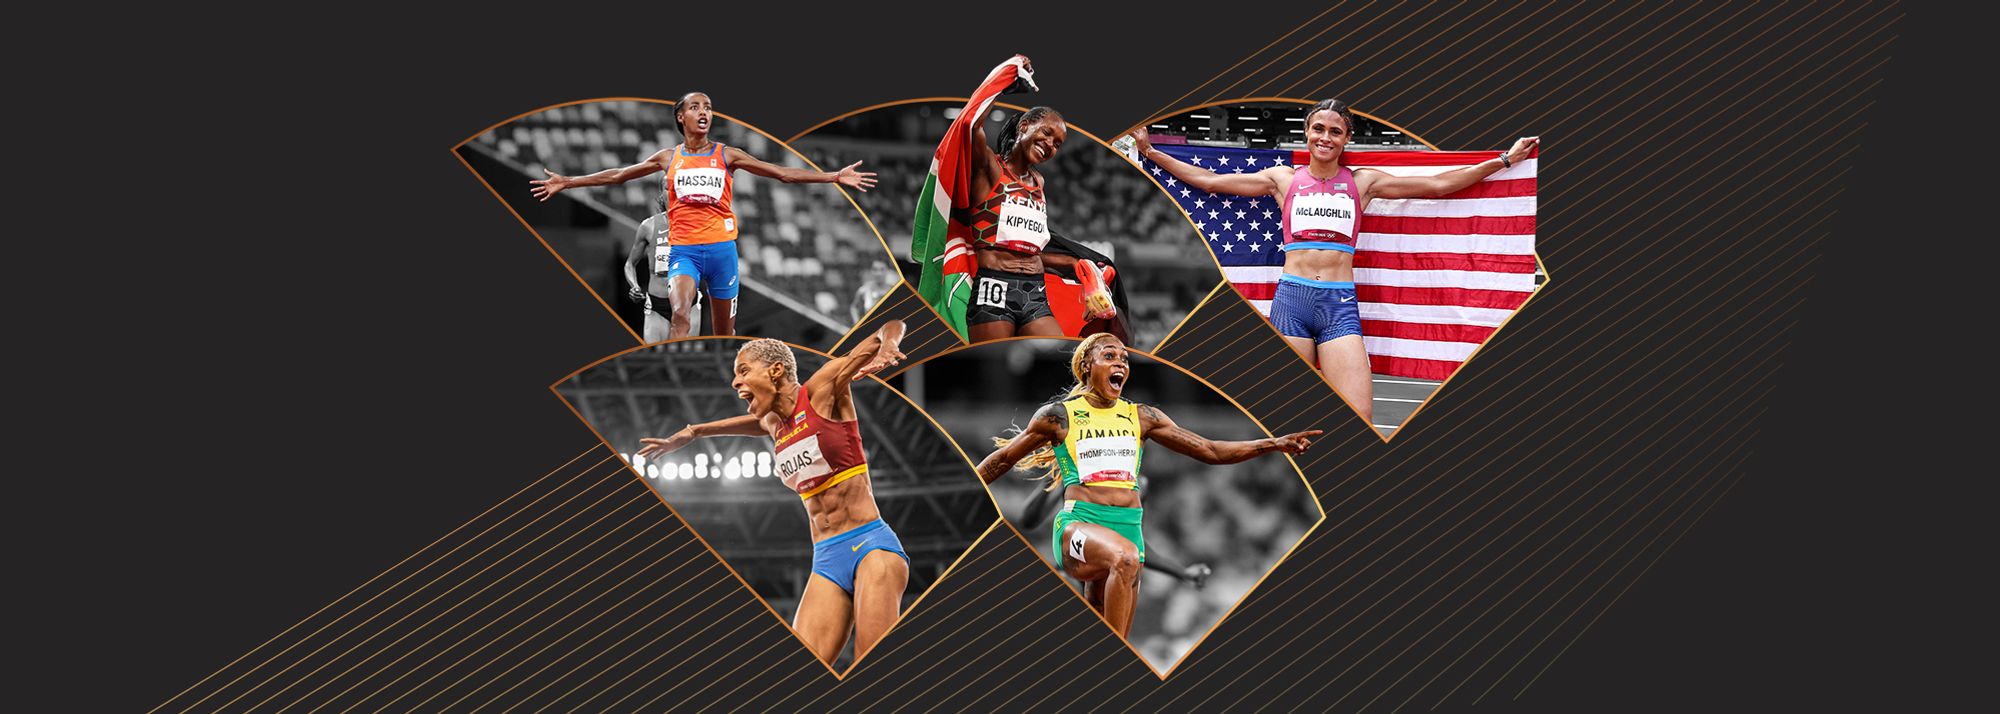 World Athletics is pleased to confirm the five finalists for Female World Athlete of the Year.